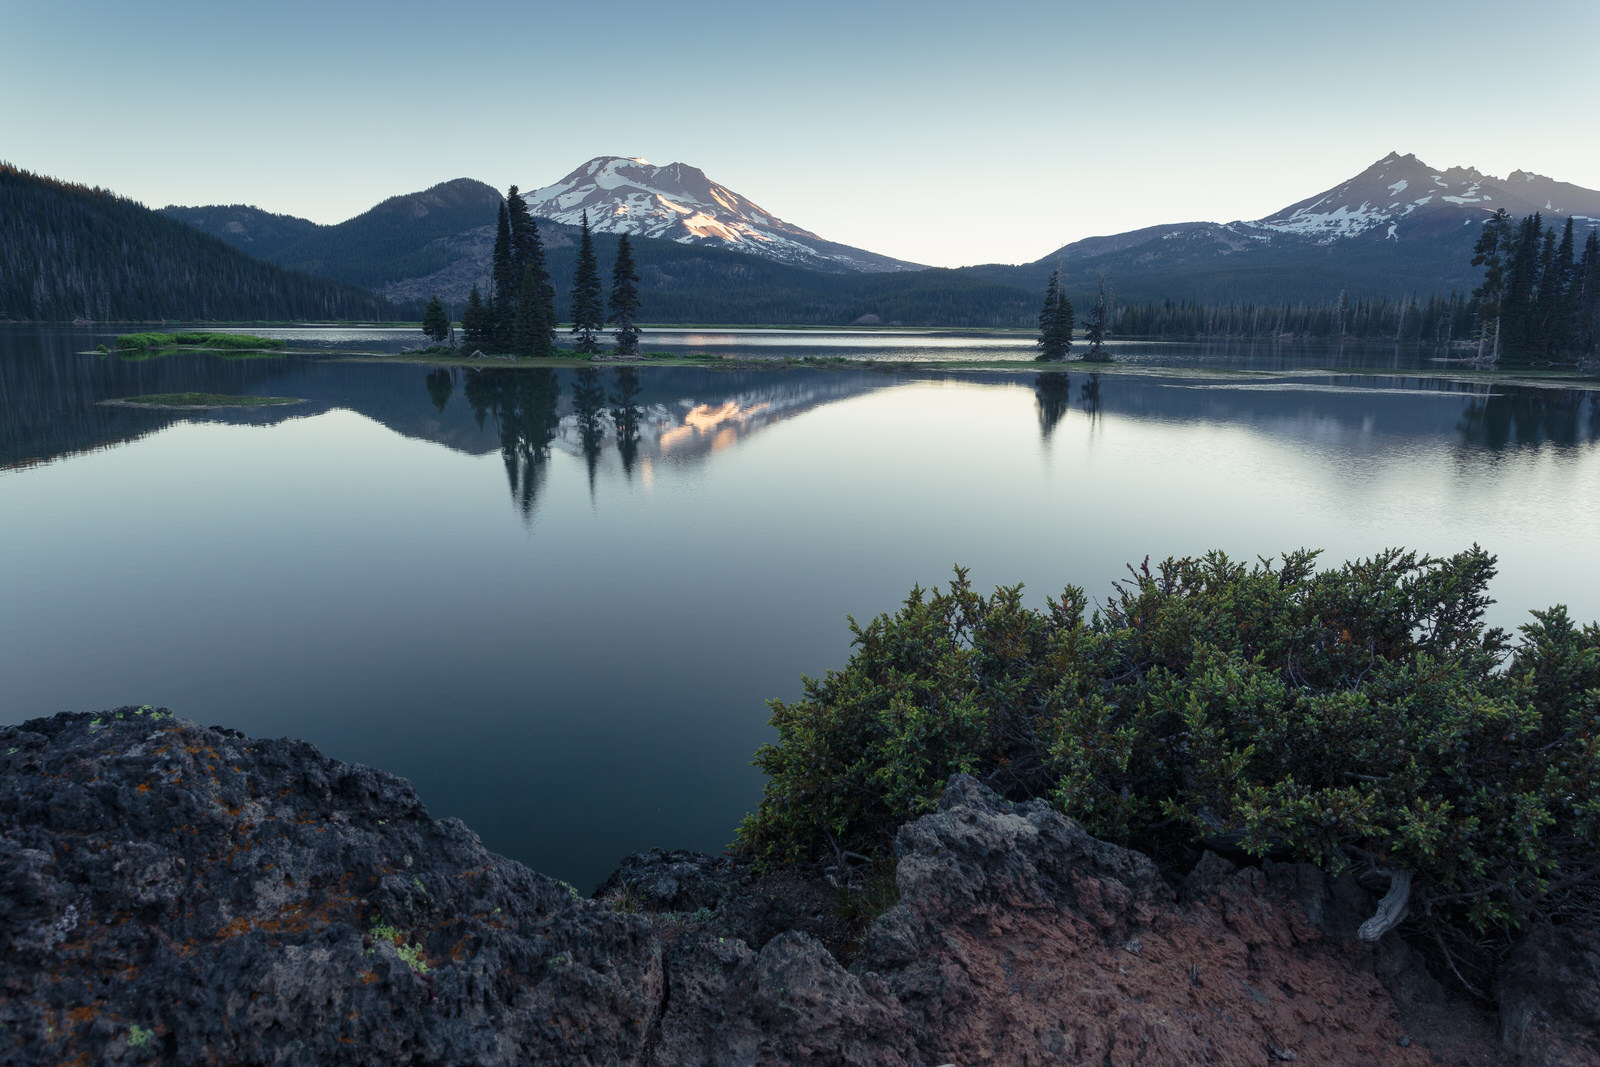  First light at Sparks Lake near Bend, Oregon 